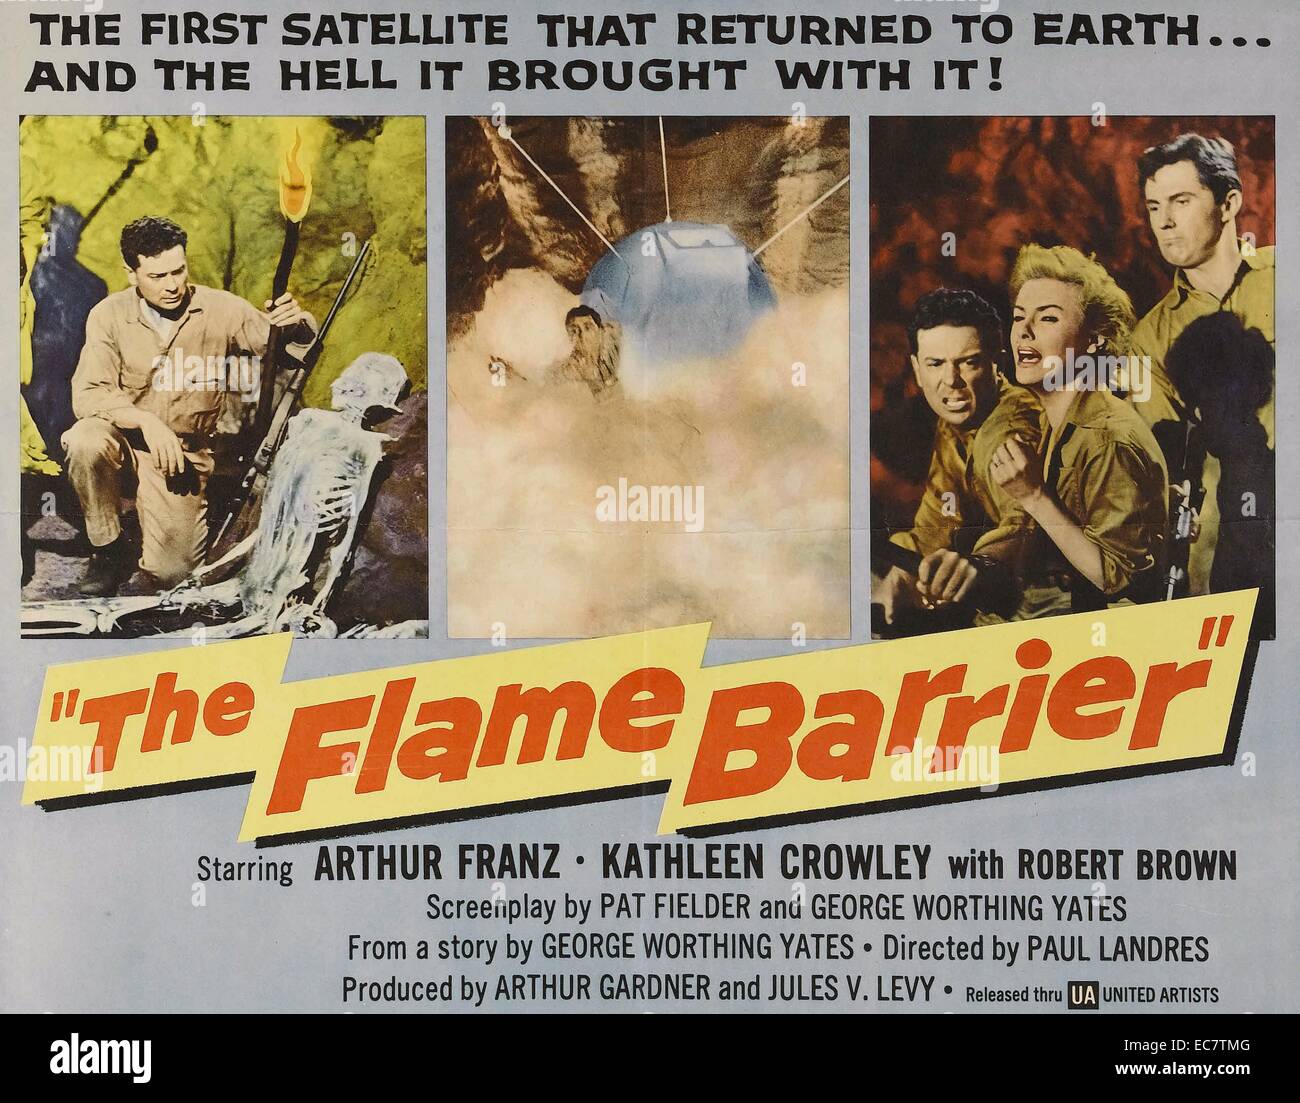 The Flame Barrier is a 1958 American Sci-fi film directed by Paul Landres and starring Arthur Franz and Kathleen Crowley. It tells the story of a woman searching for her husband who is lost in the Yucatan jungle. Stock Photo